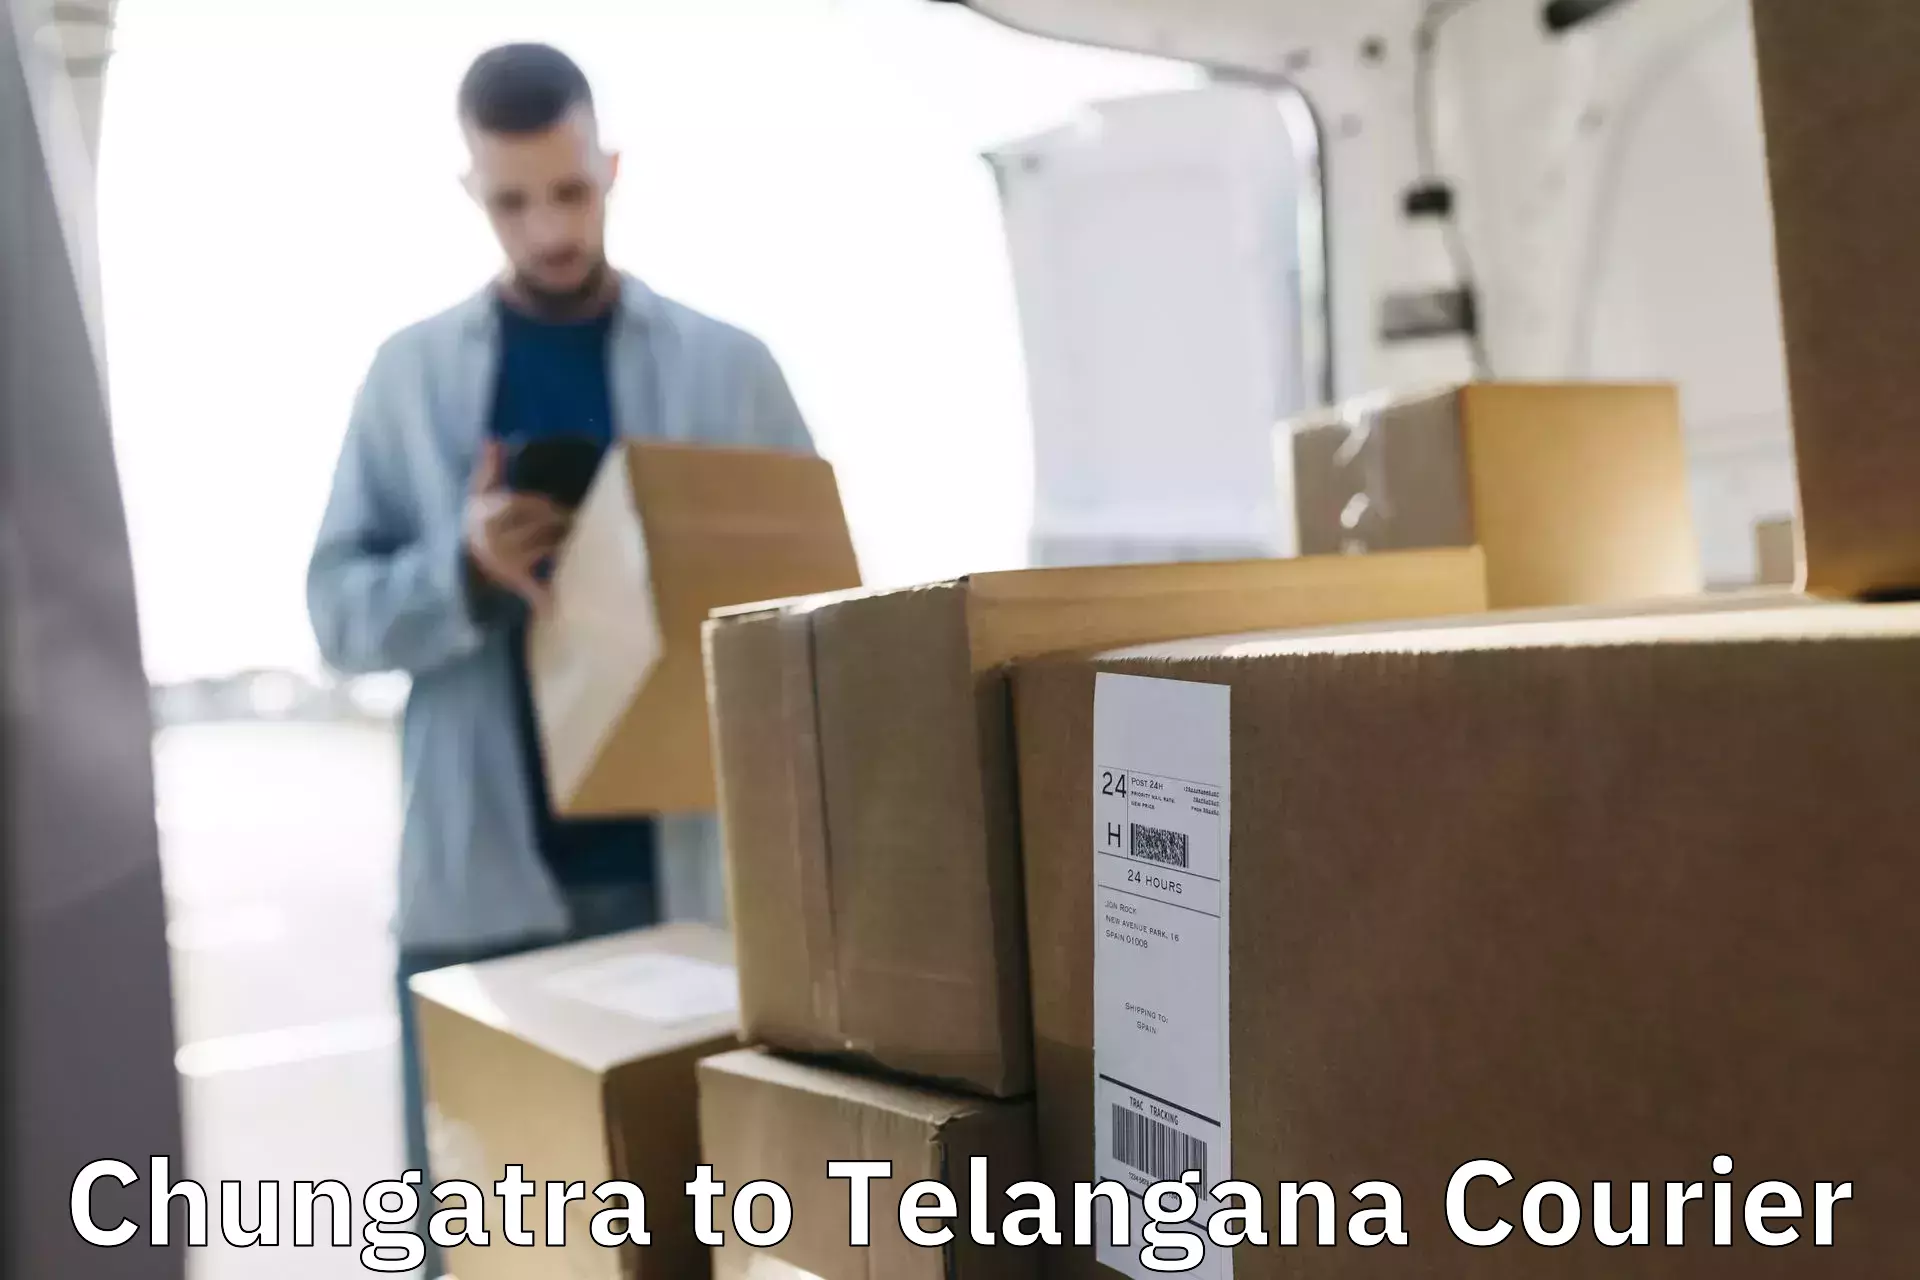 Multi-national courier services Chungatra to Shamshabad